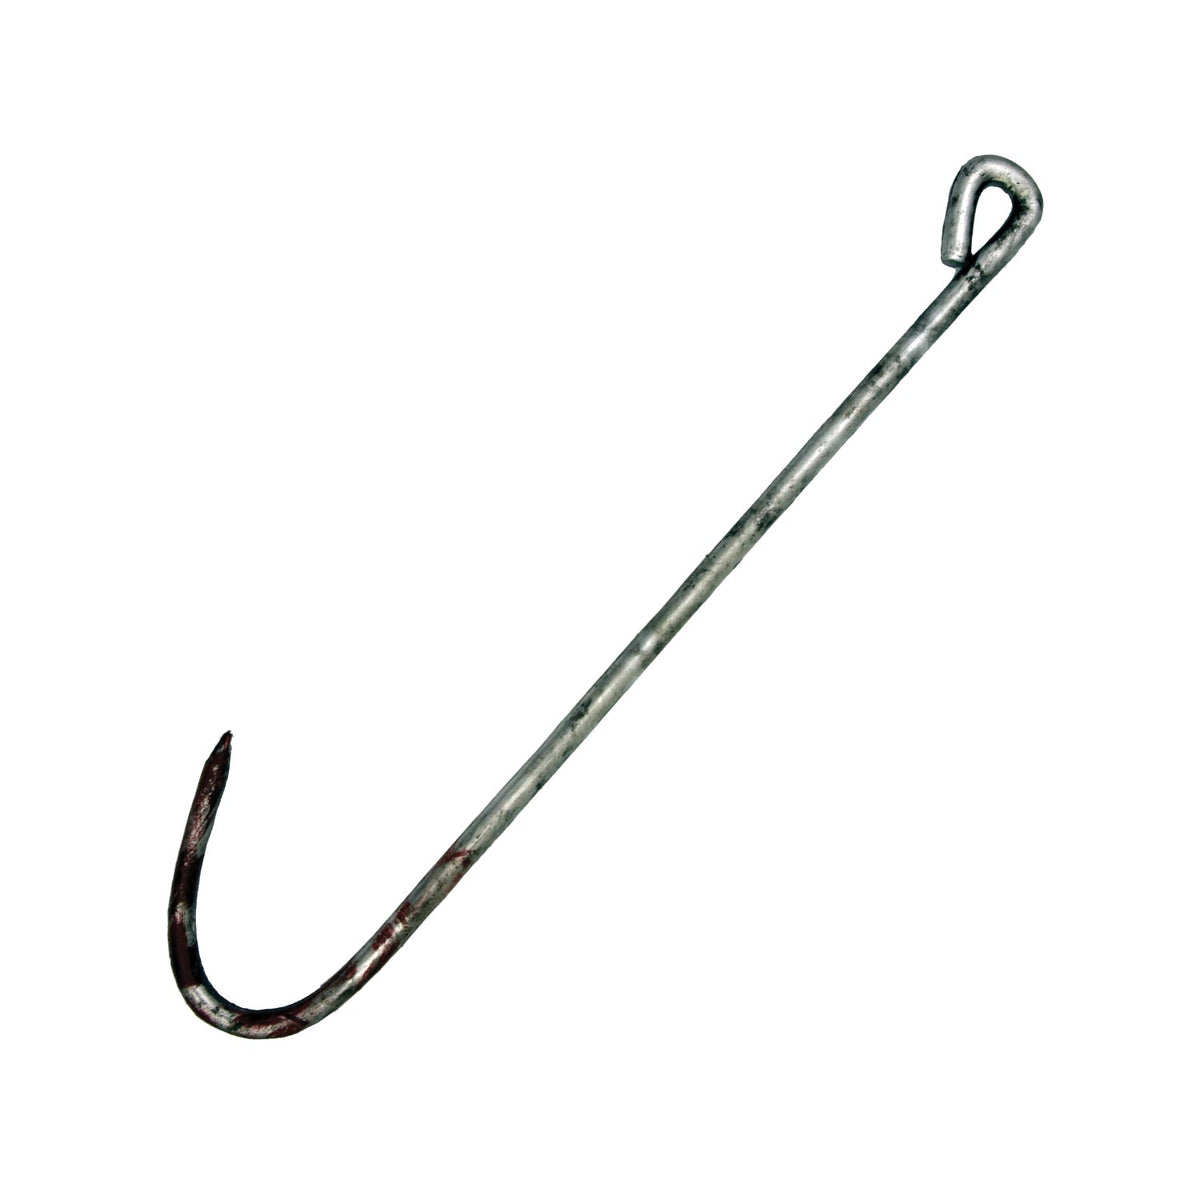 The Texas Chainsaw Massacre: Realistic Meat Hook Prop